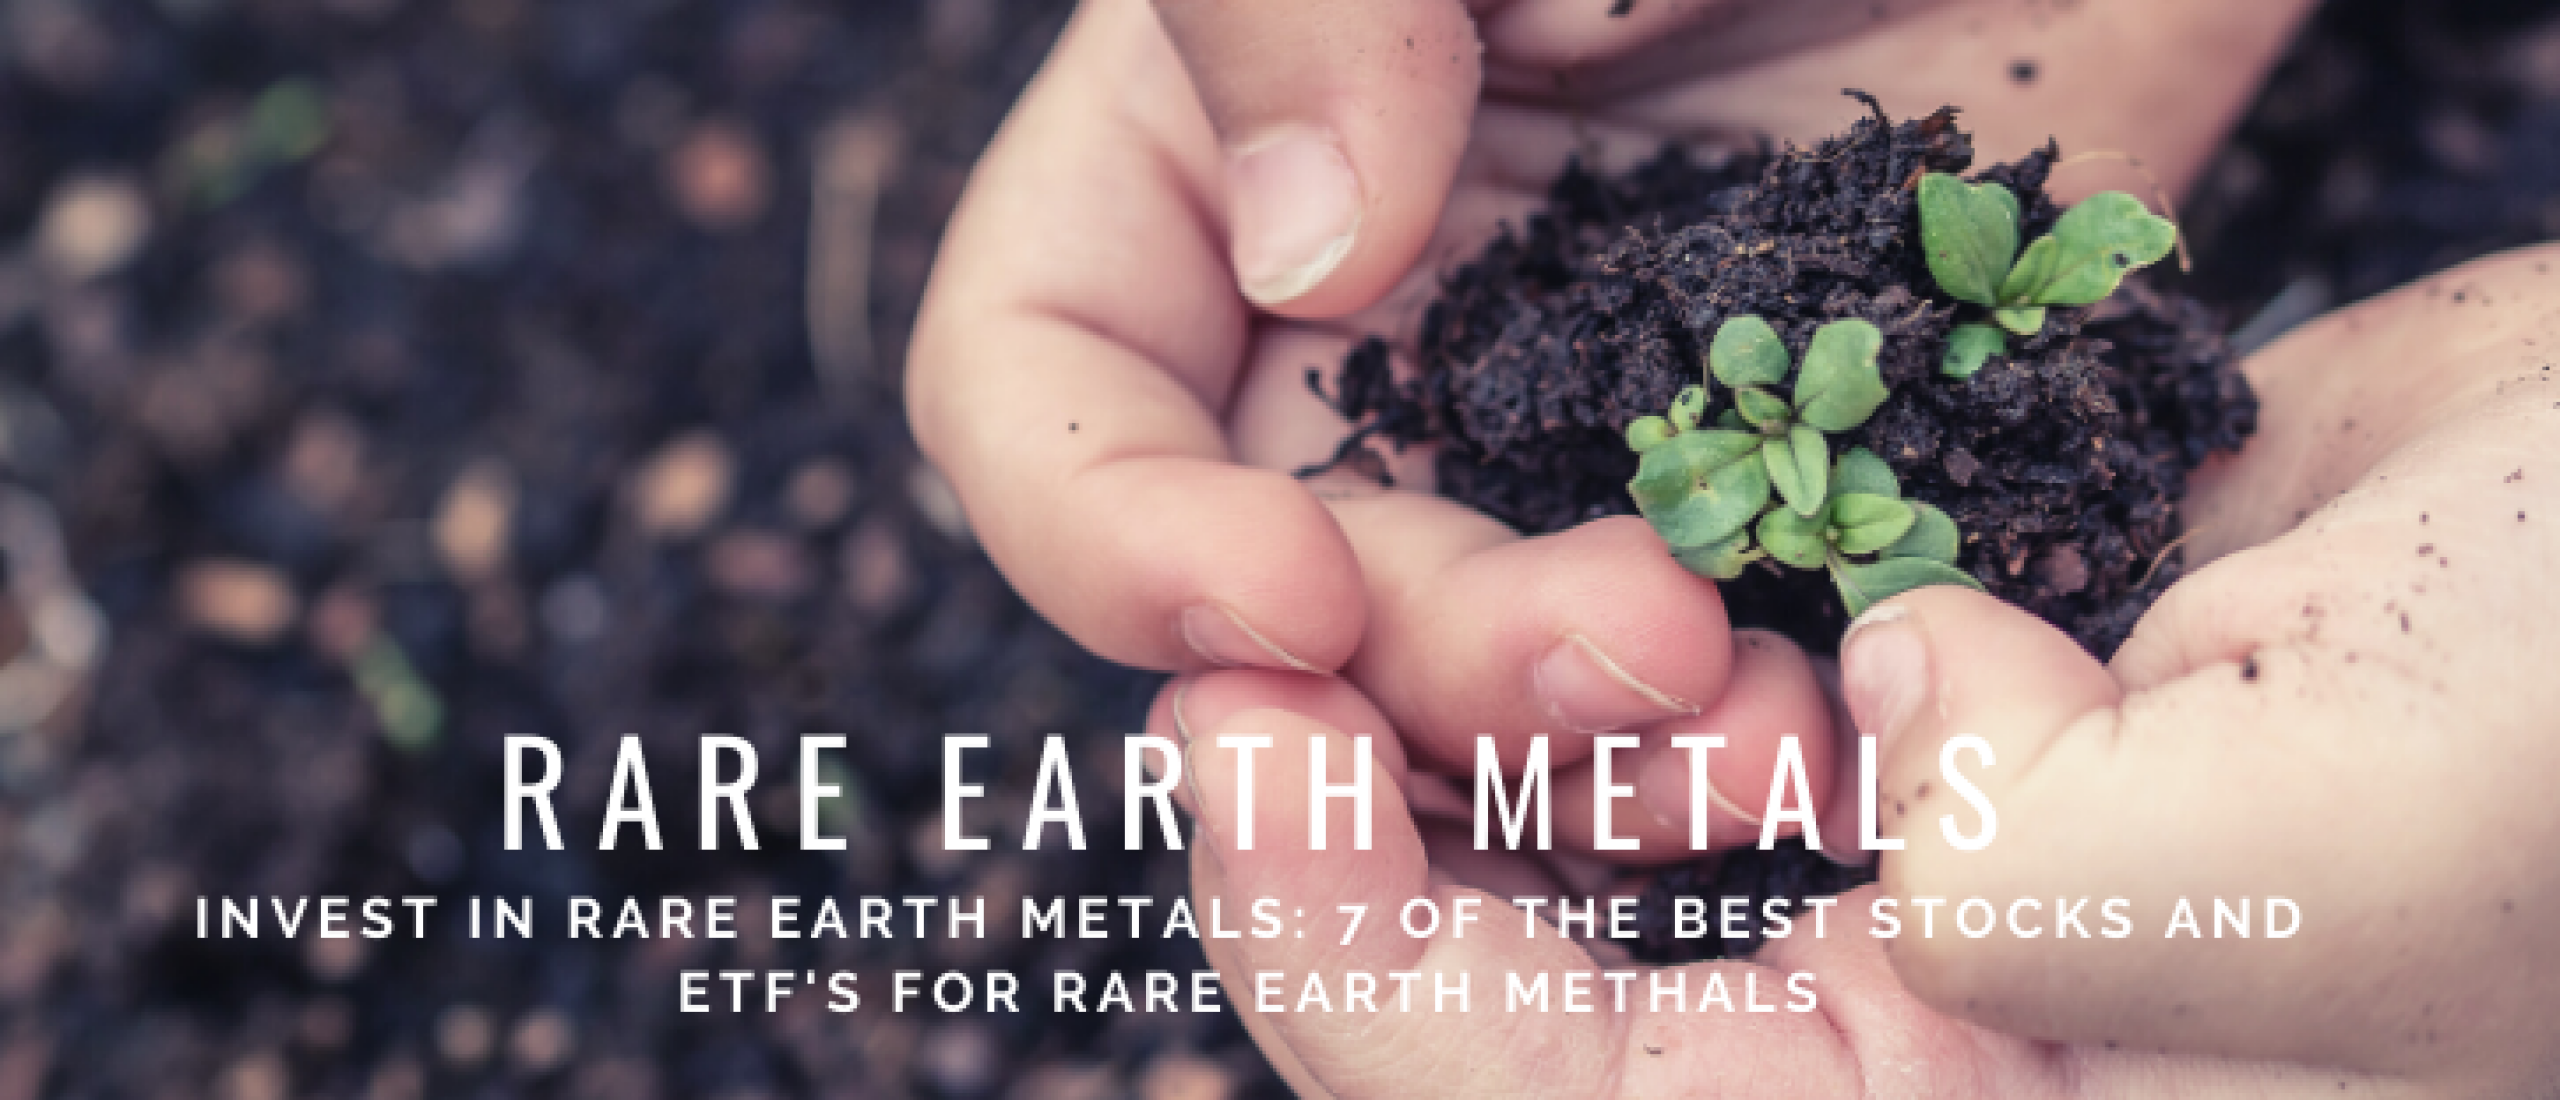 Investing in Rare Earth Metals: Best Stocks and ETFs